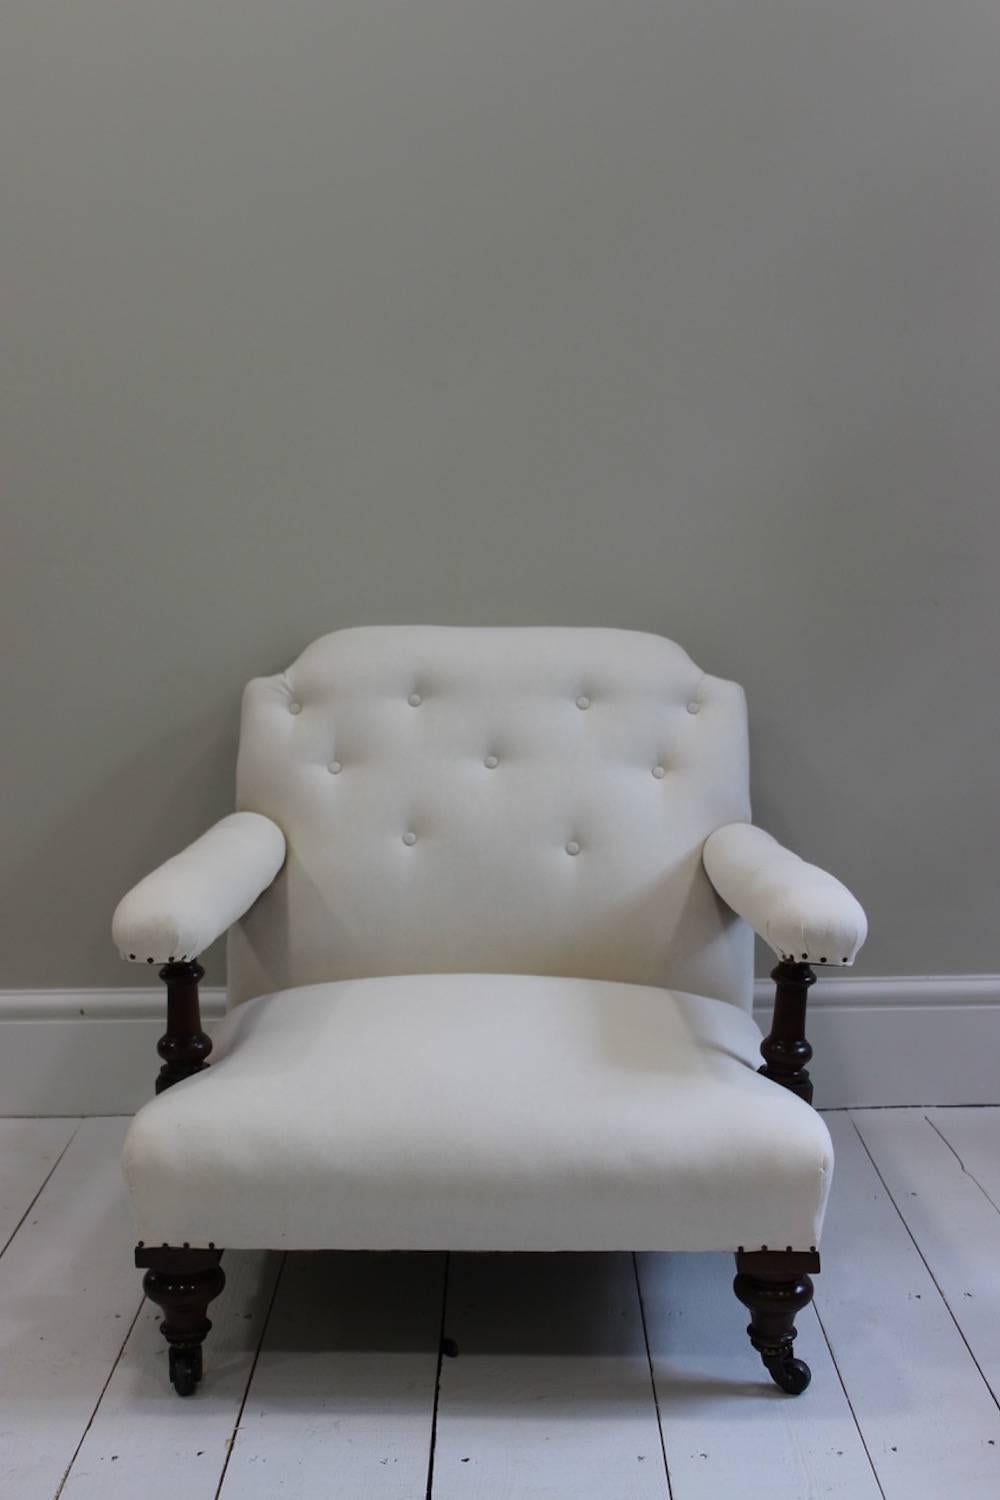 A smart and comfortable mid-19th century English low armchair, the mahogany frame with turned legs and castors, re-upholstered in calico with a buttoned back.